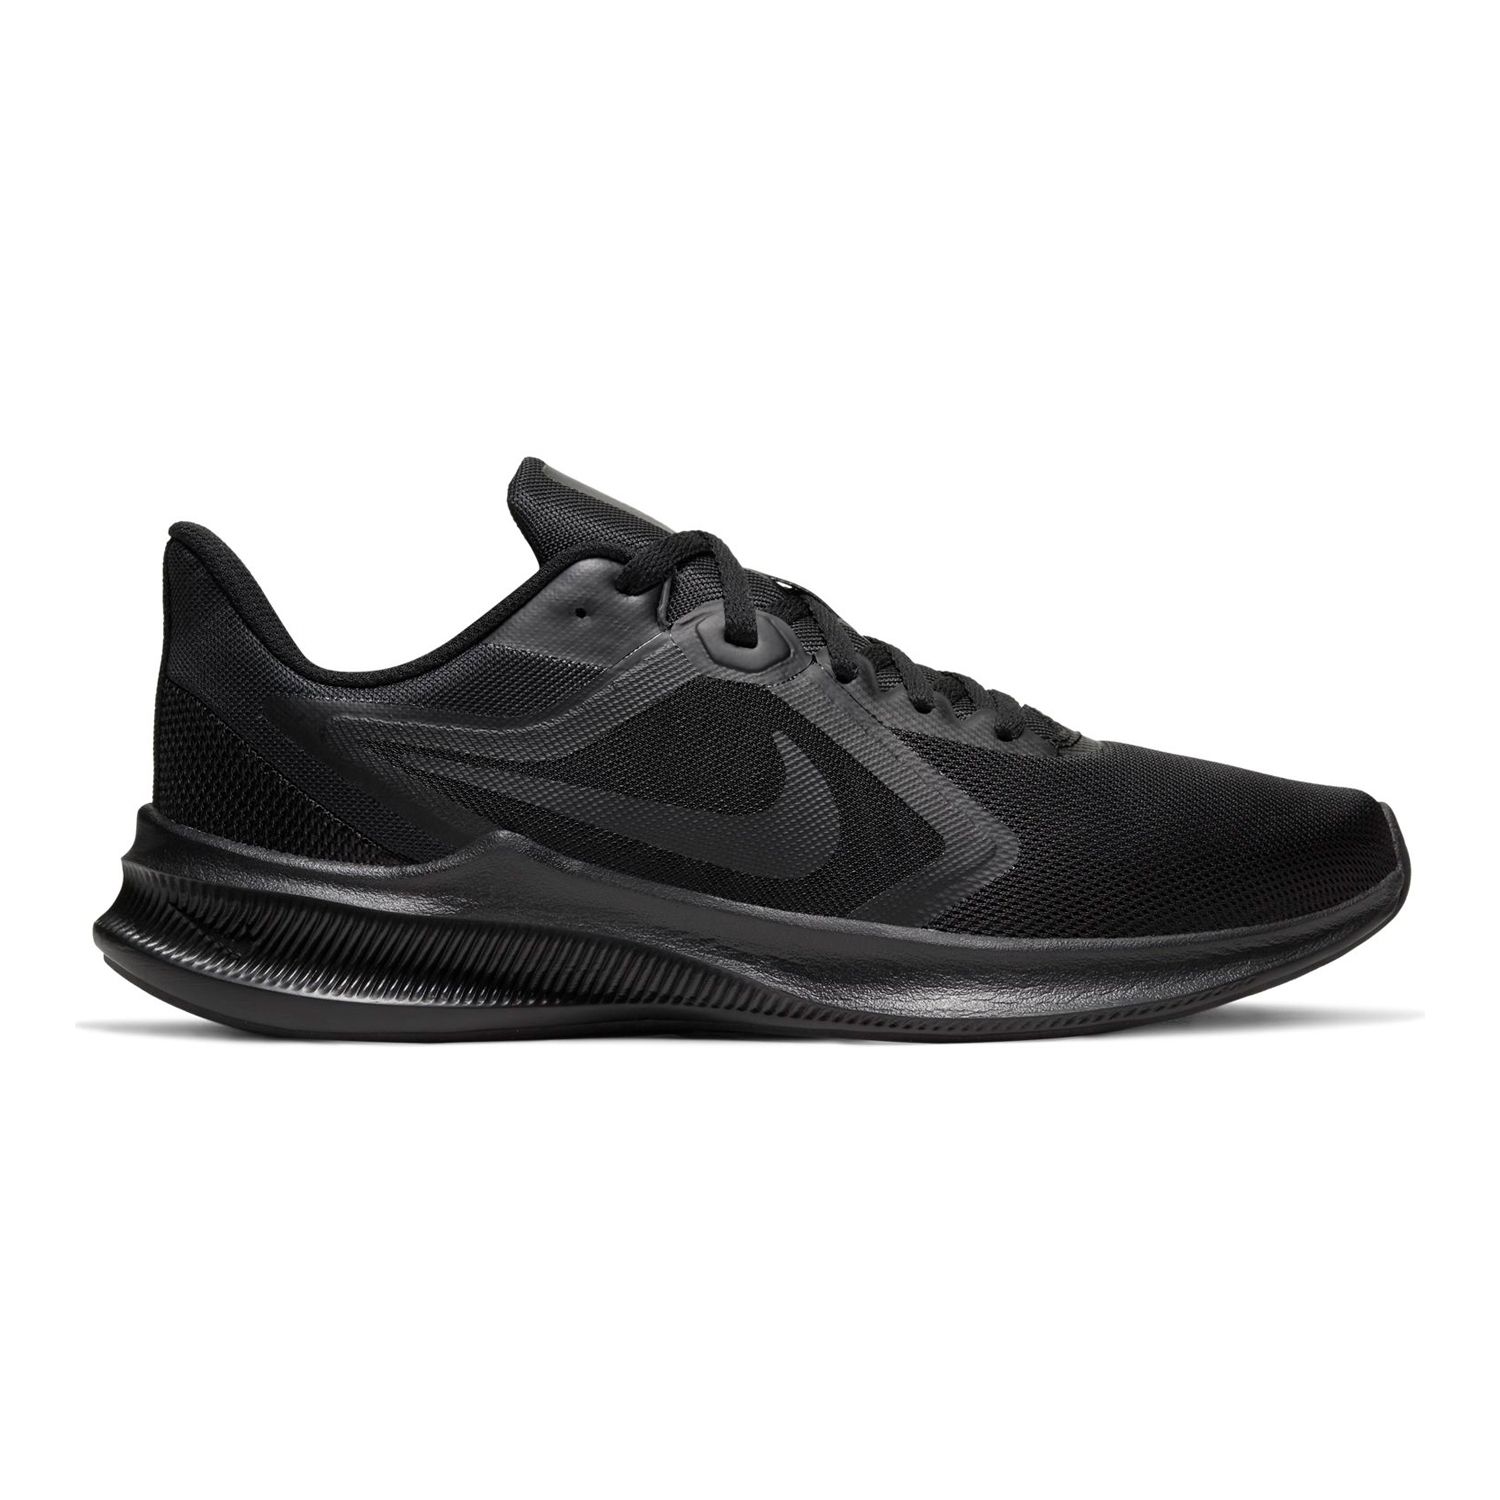 nike downshifter 10 price